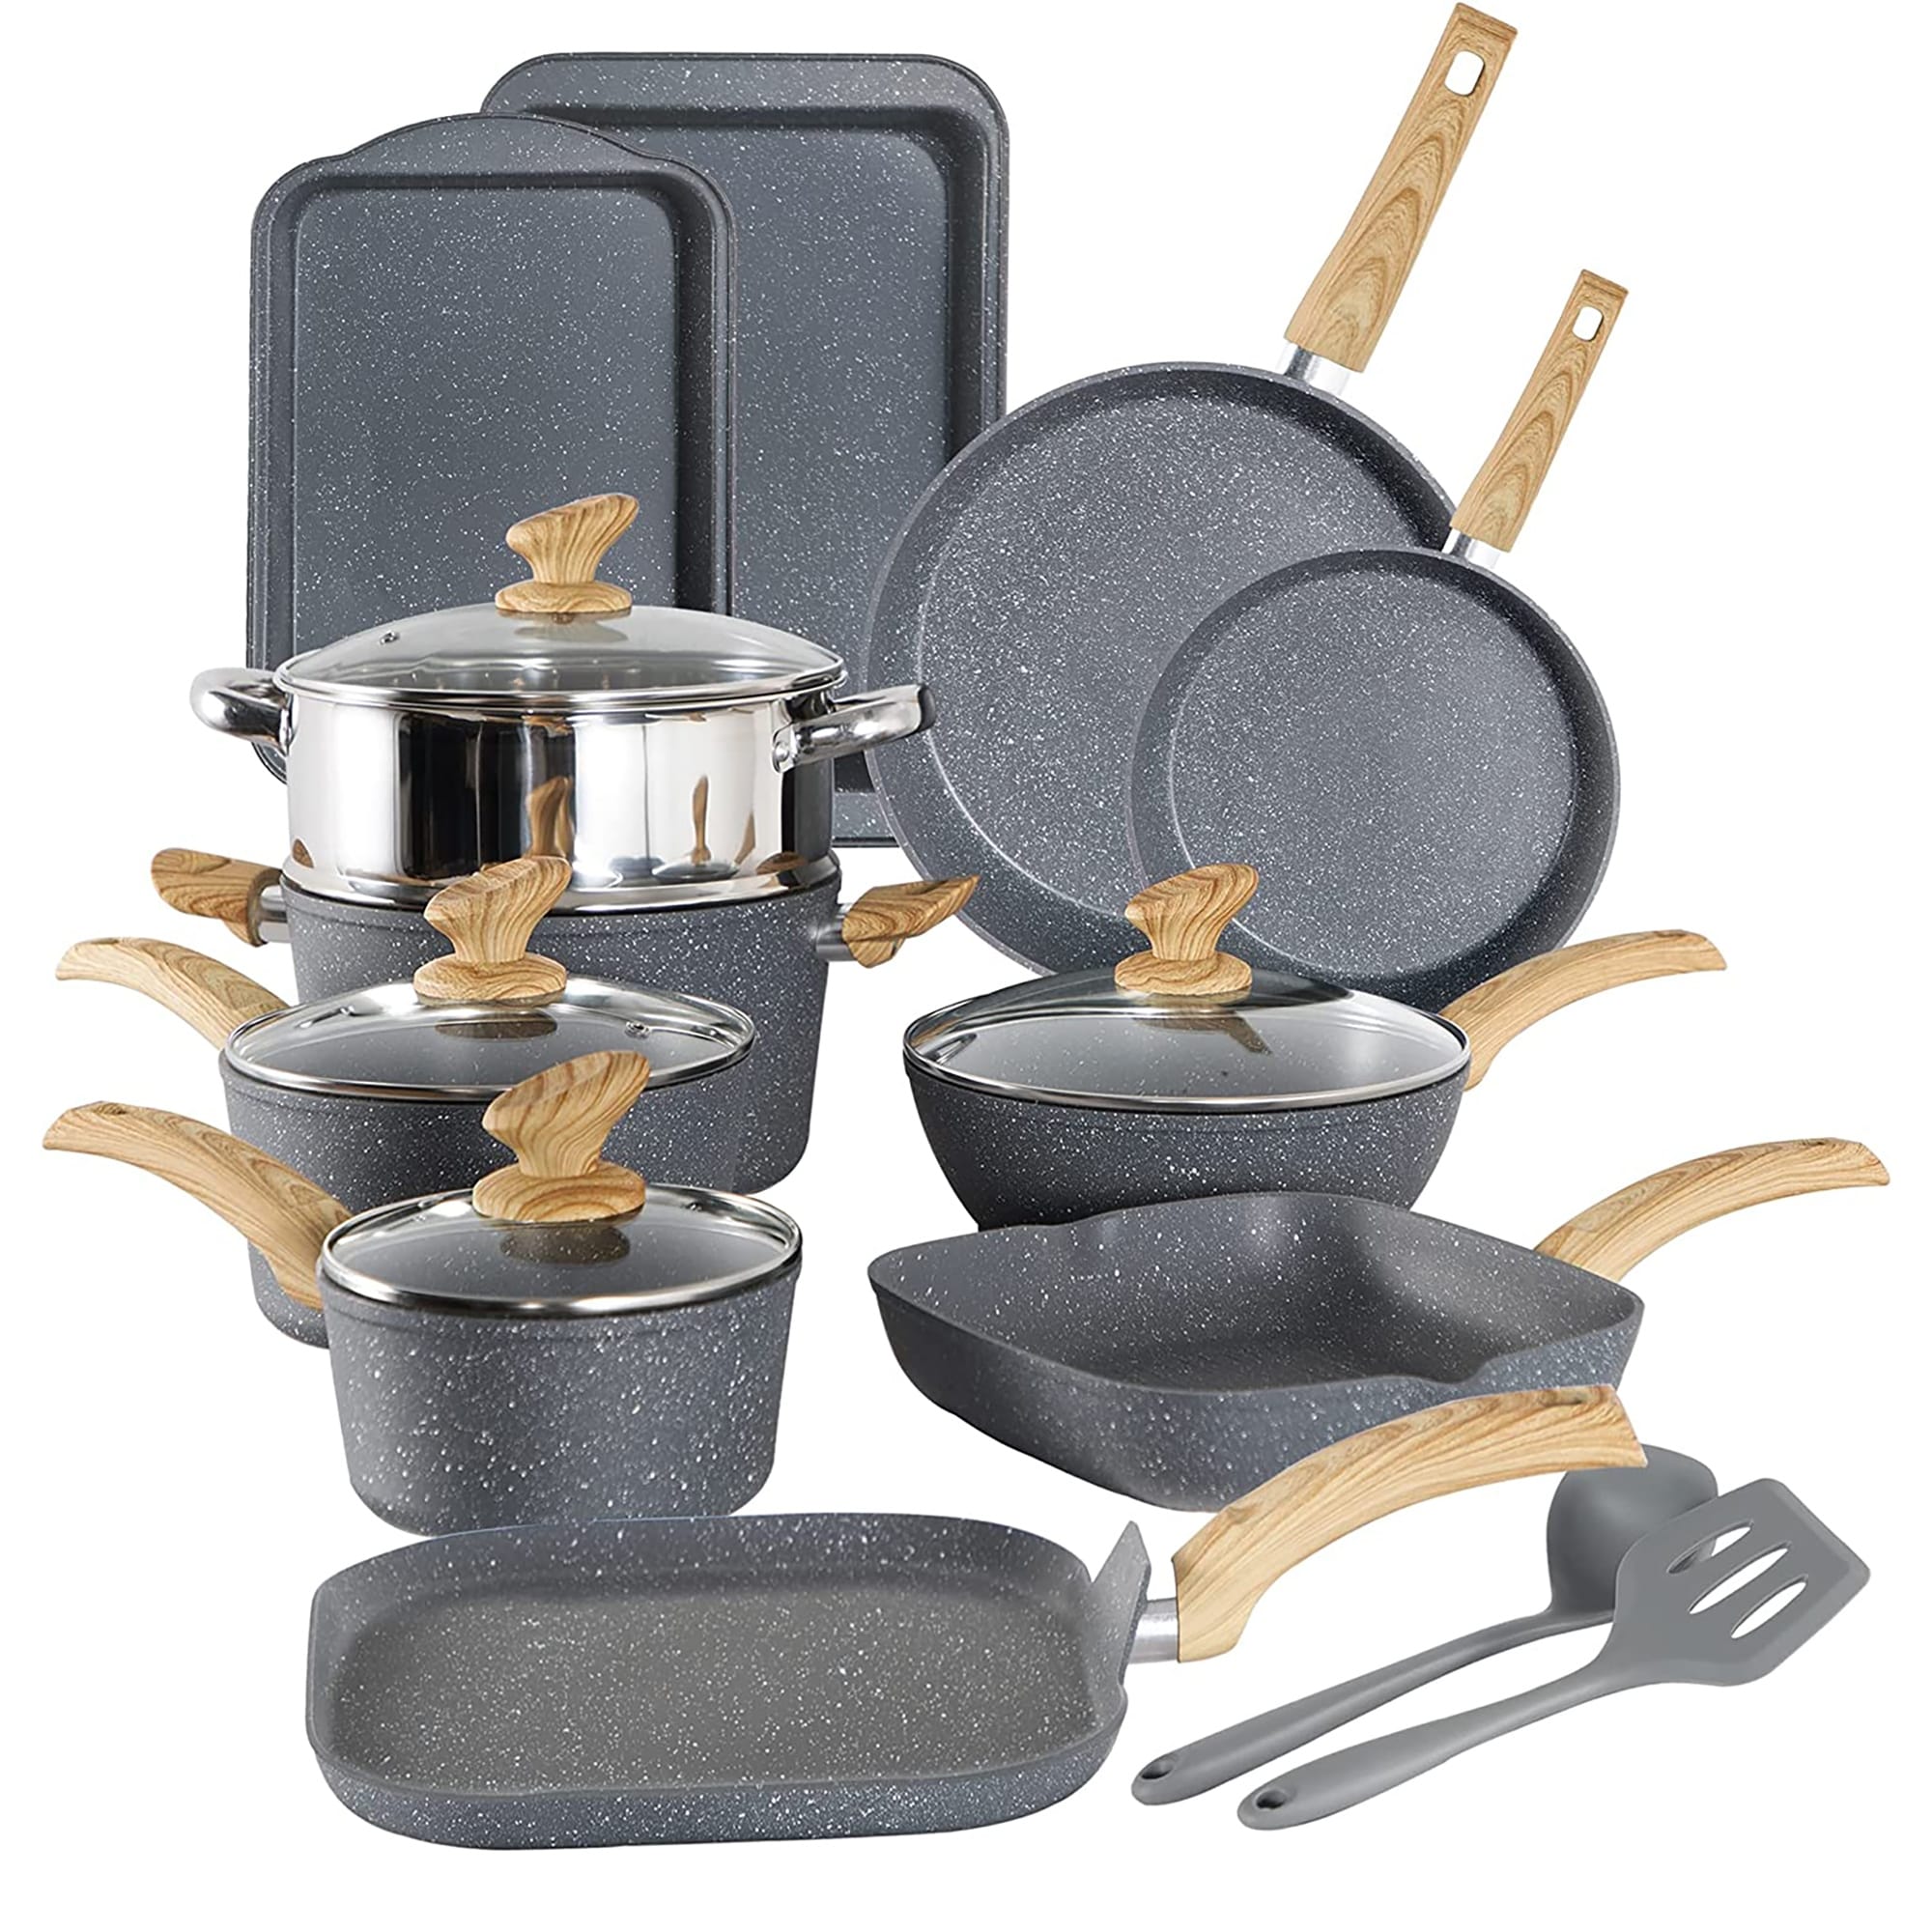 https://ak1.ostkcdn.com/images/products/is/images/direct/51a09f544aa257ebee51eb404908f6f84e21f075/17-Piece-Kitchen-Granite-Cookware-Set%2C-Non-stick-Cooking-Pots-and-Pans-Set.jpg